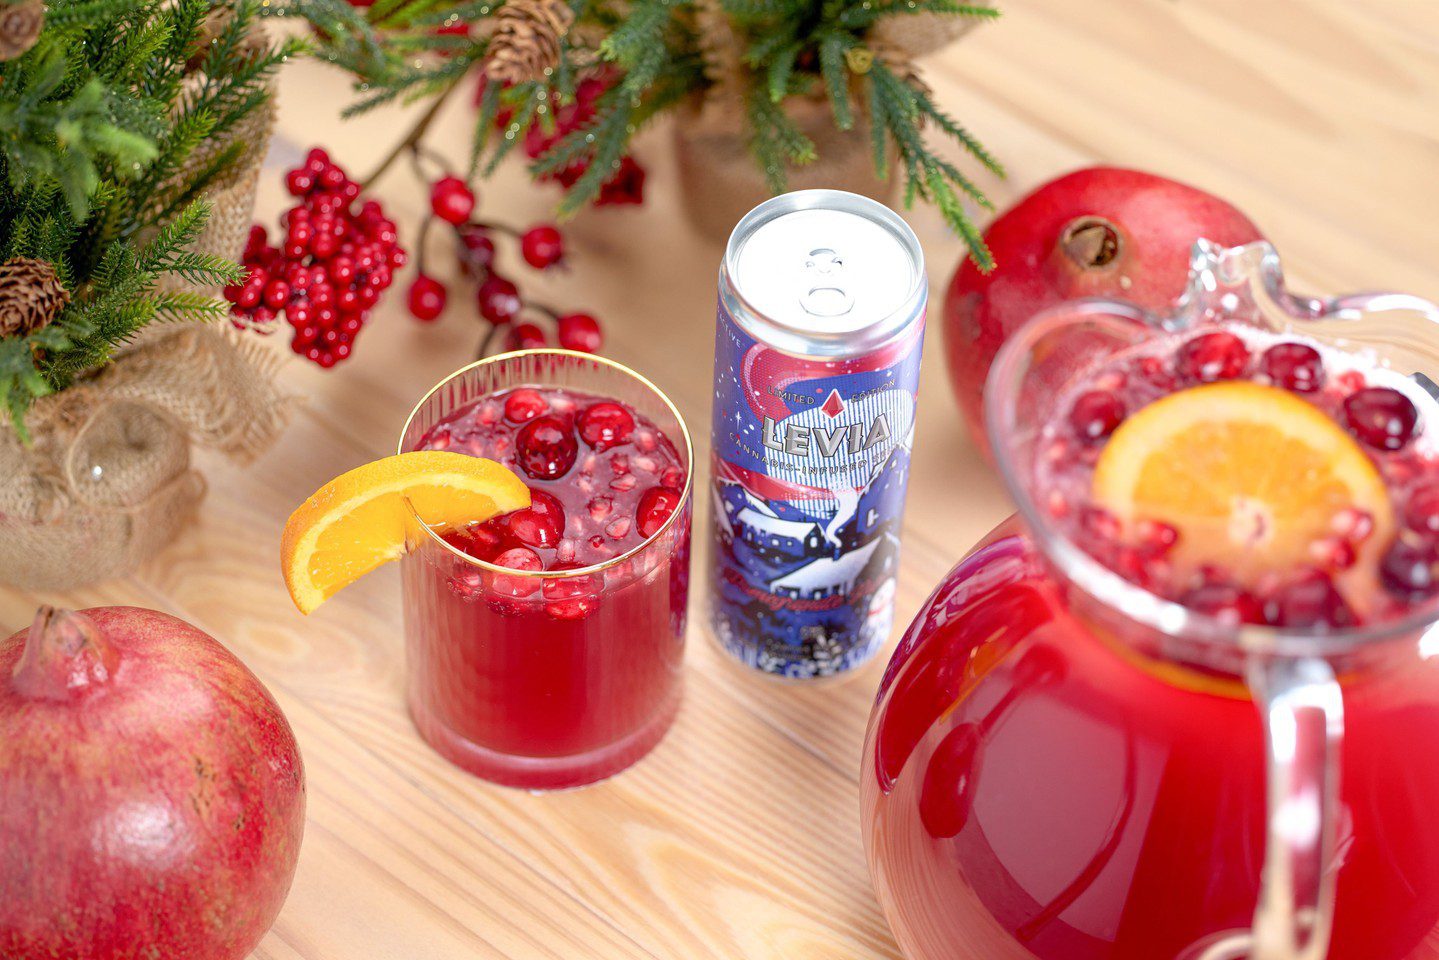 Kick your New Year's celebration up with LEVIA Pomegranate Punch!
: @craigcapellophotography